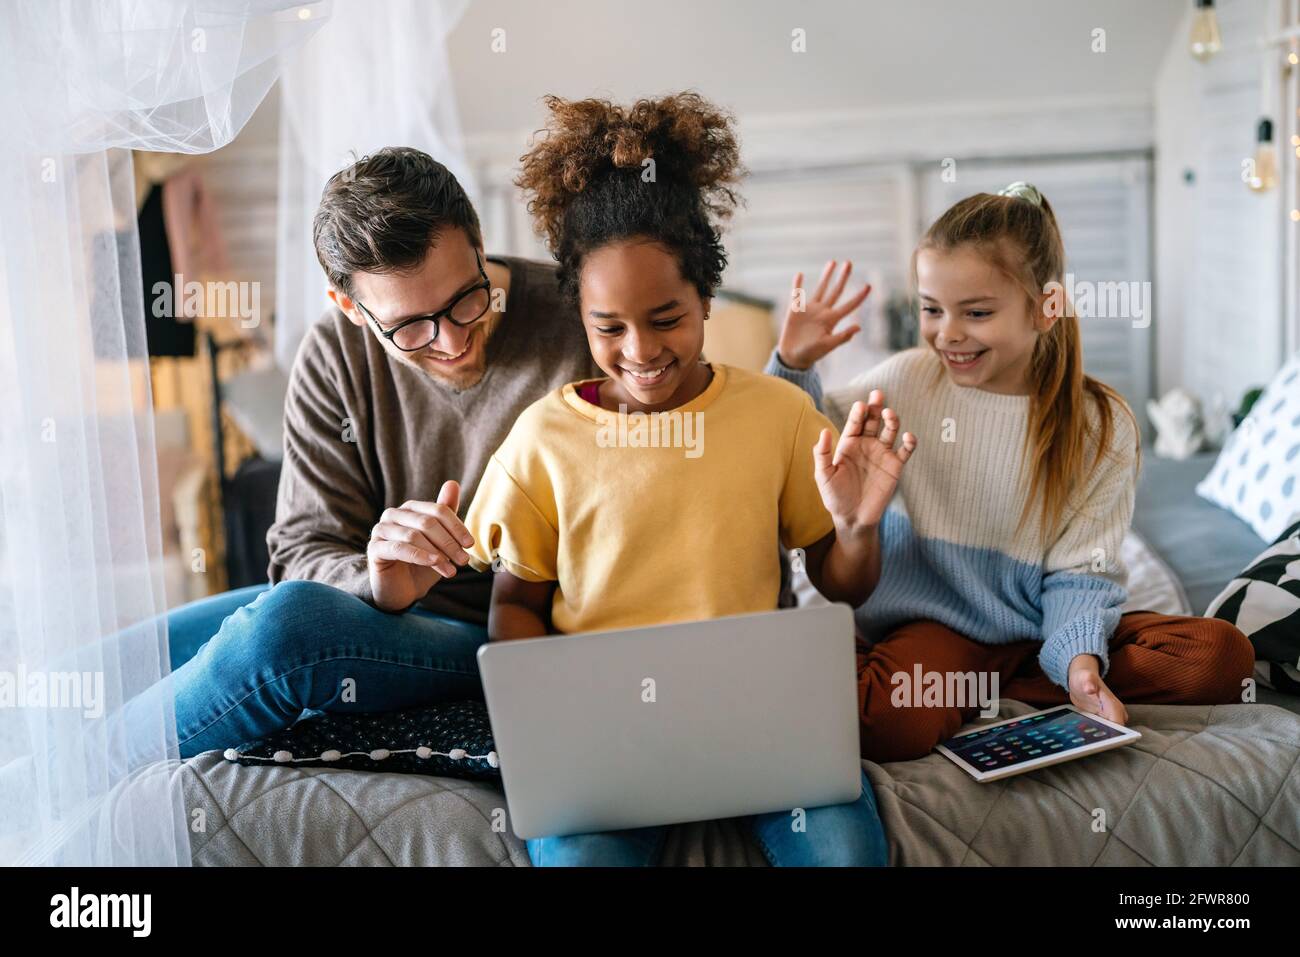 People, family and technology concept. Happy father with multiethnic children having fun together Stock Photo